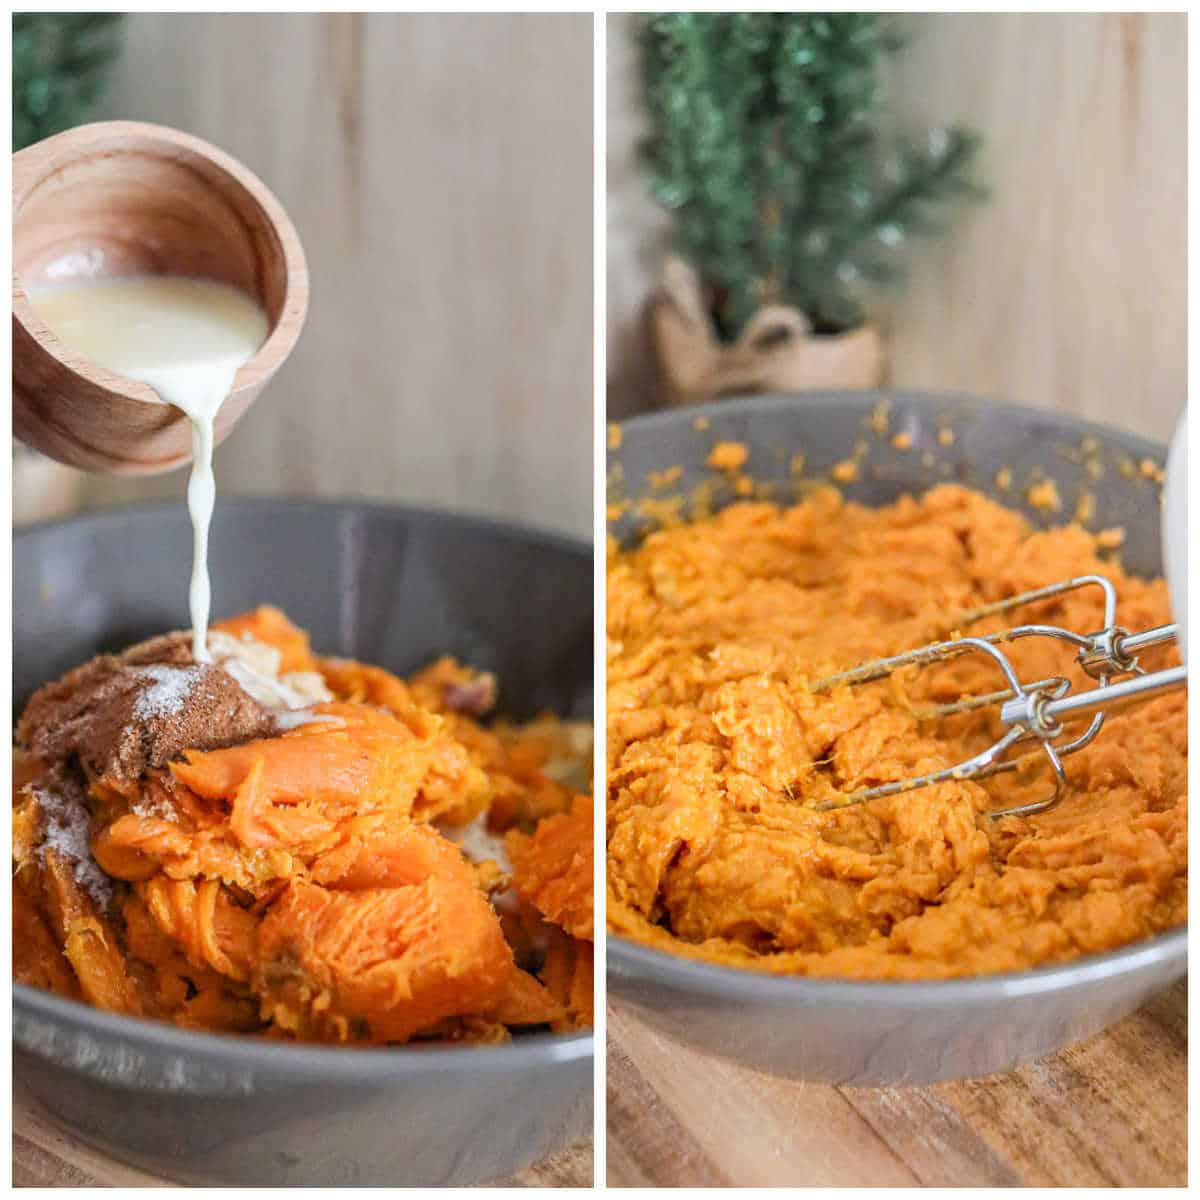 Mixing the sweet potato flesh with cream and spices.